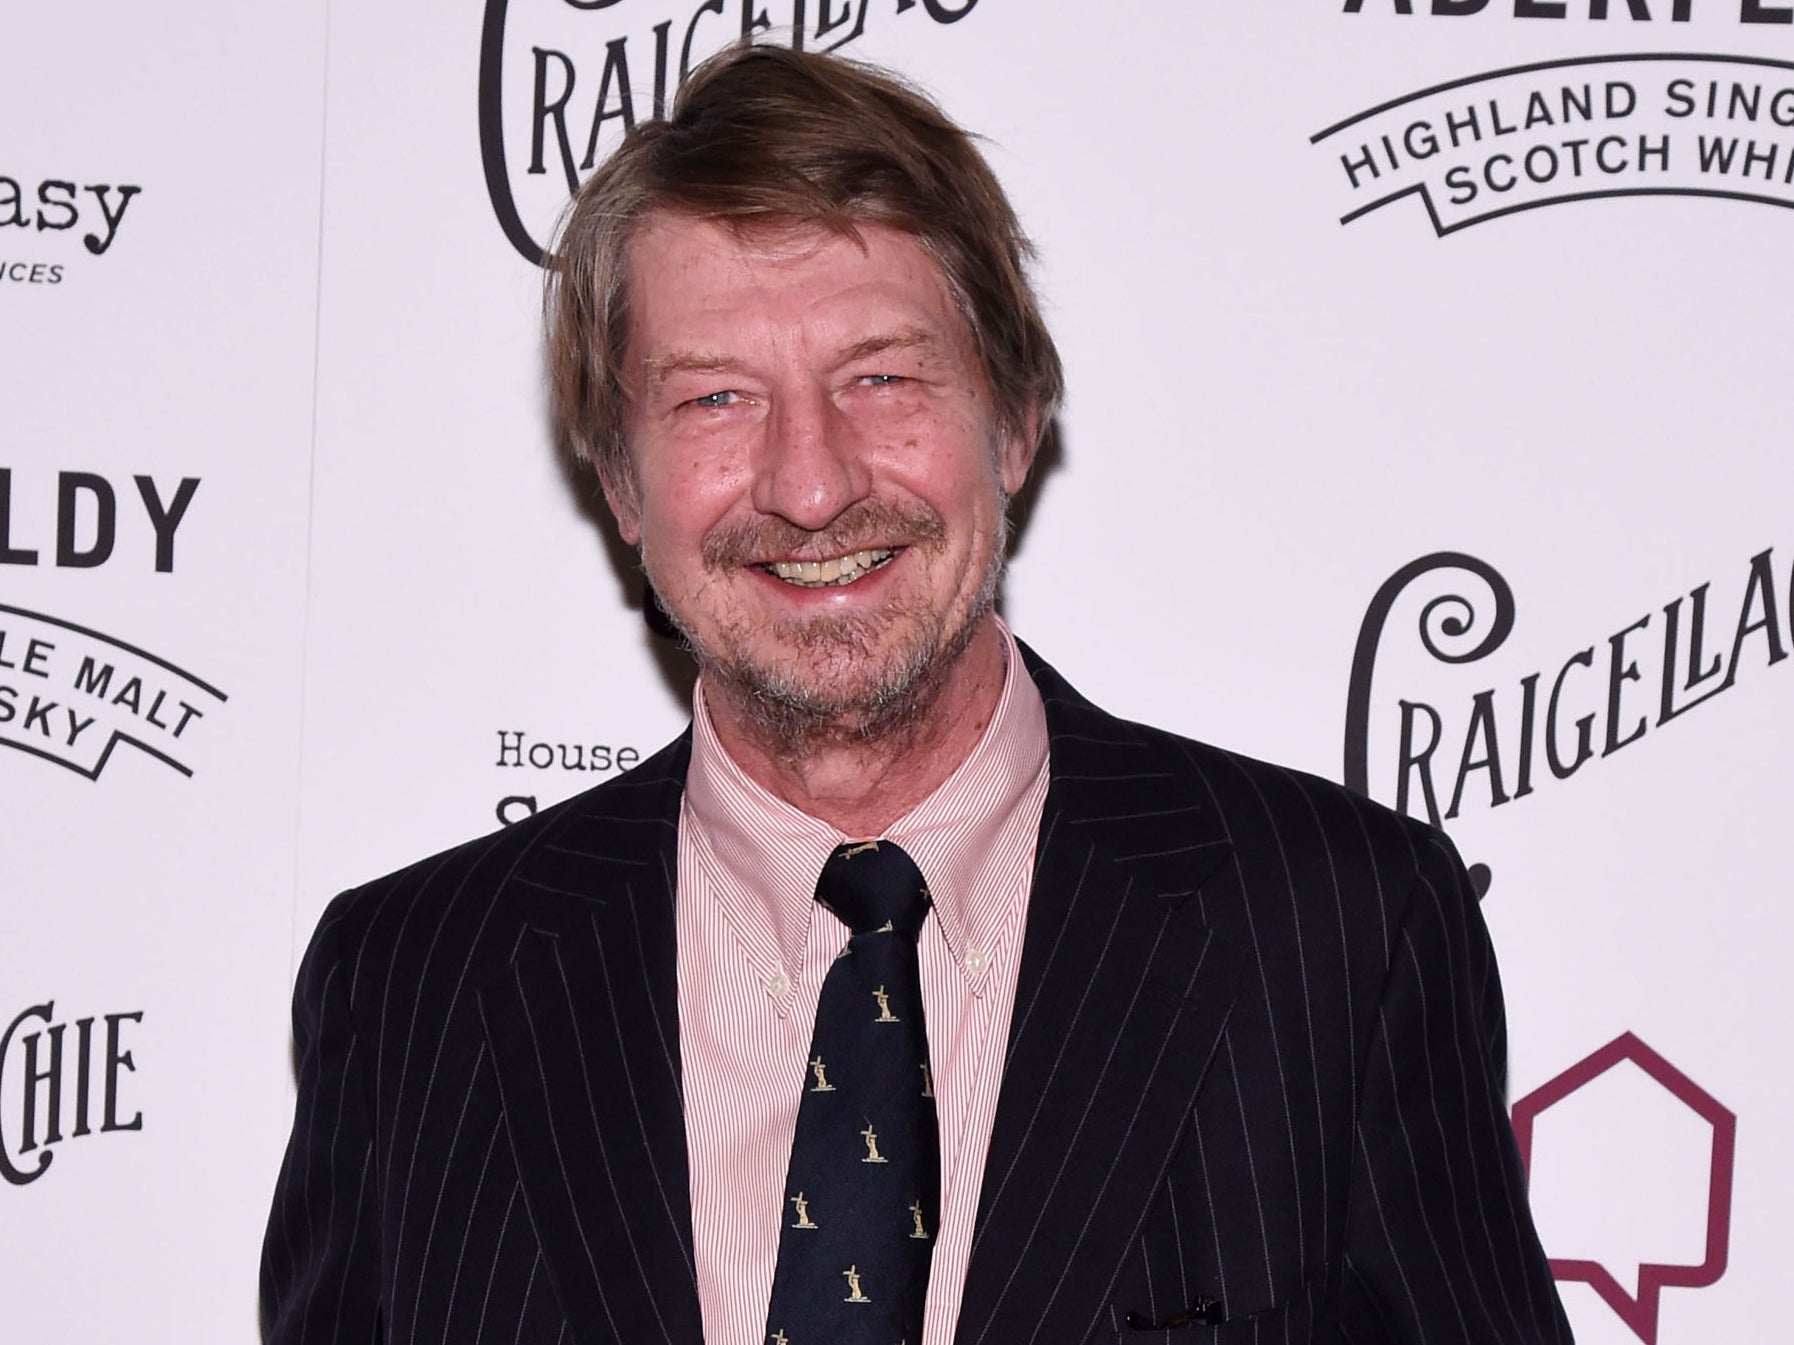 PJ O’Rourke at an event on 28 January 2015 in New York City